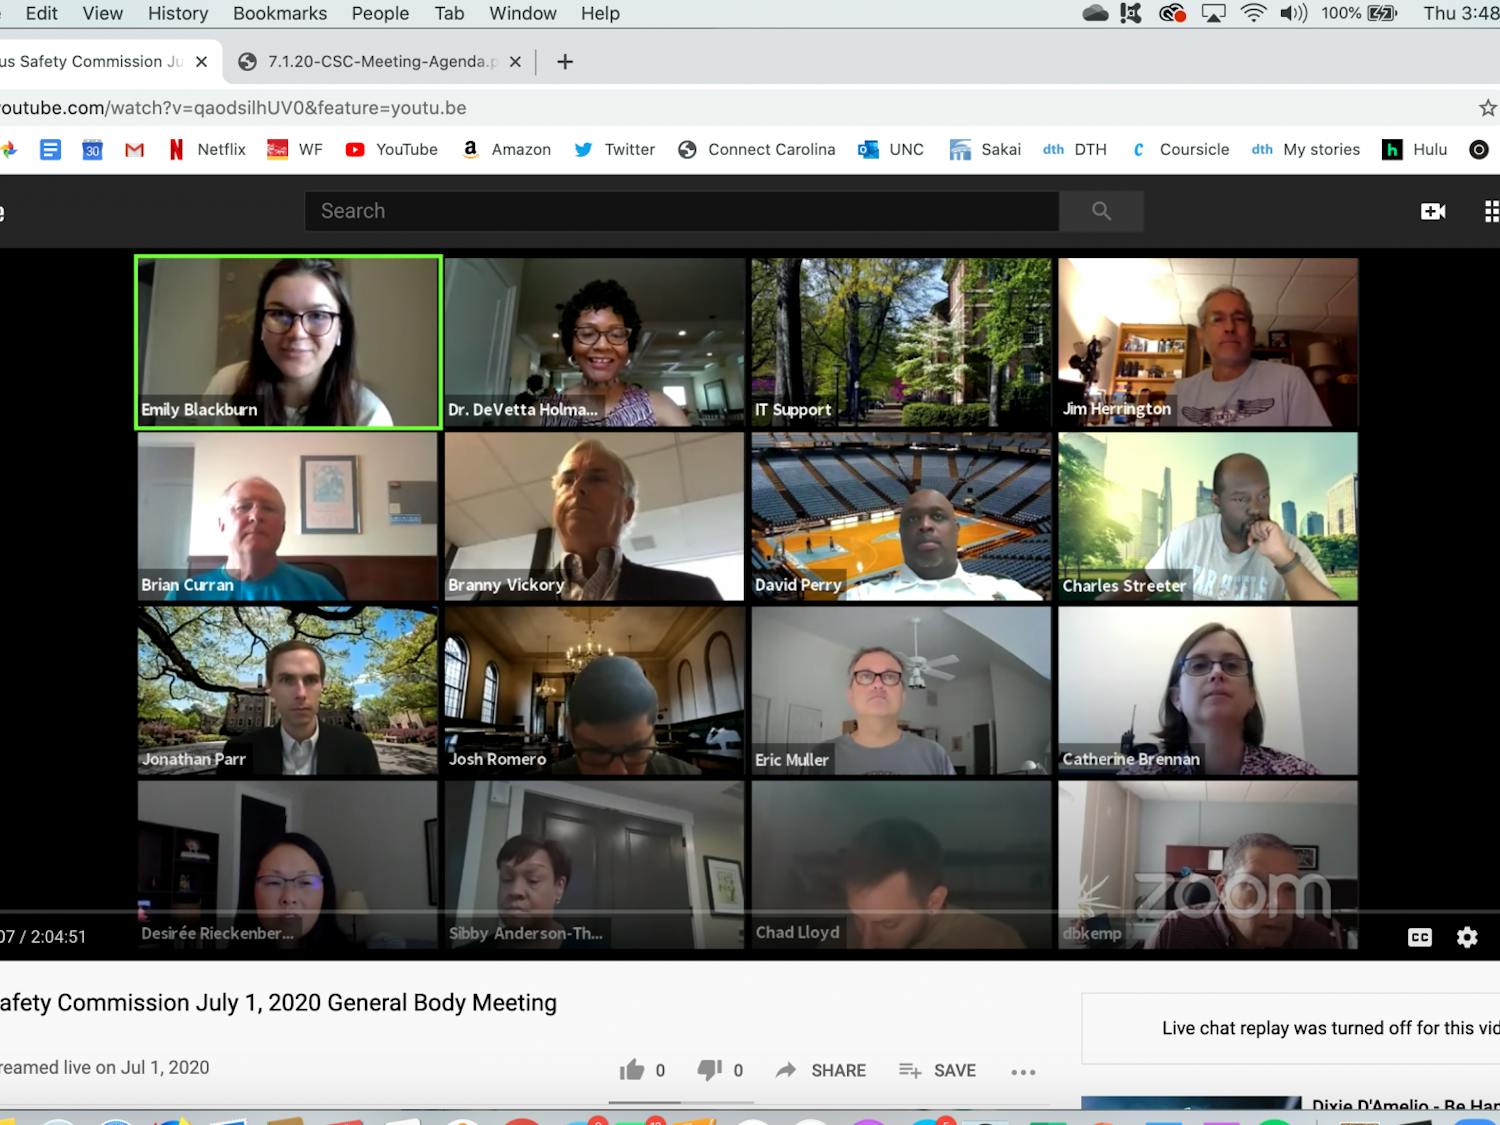 Screenshot from the virtually-held Campus Safety Commission meeting on Wednesday, July 1, 2020.